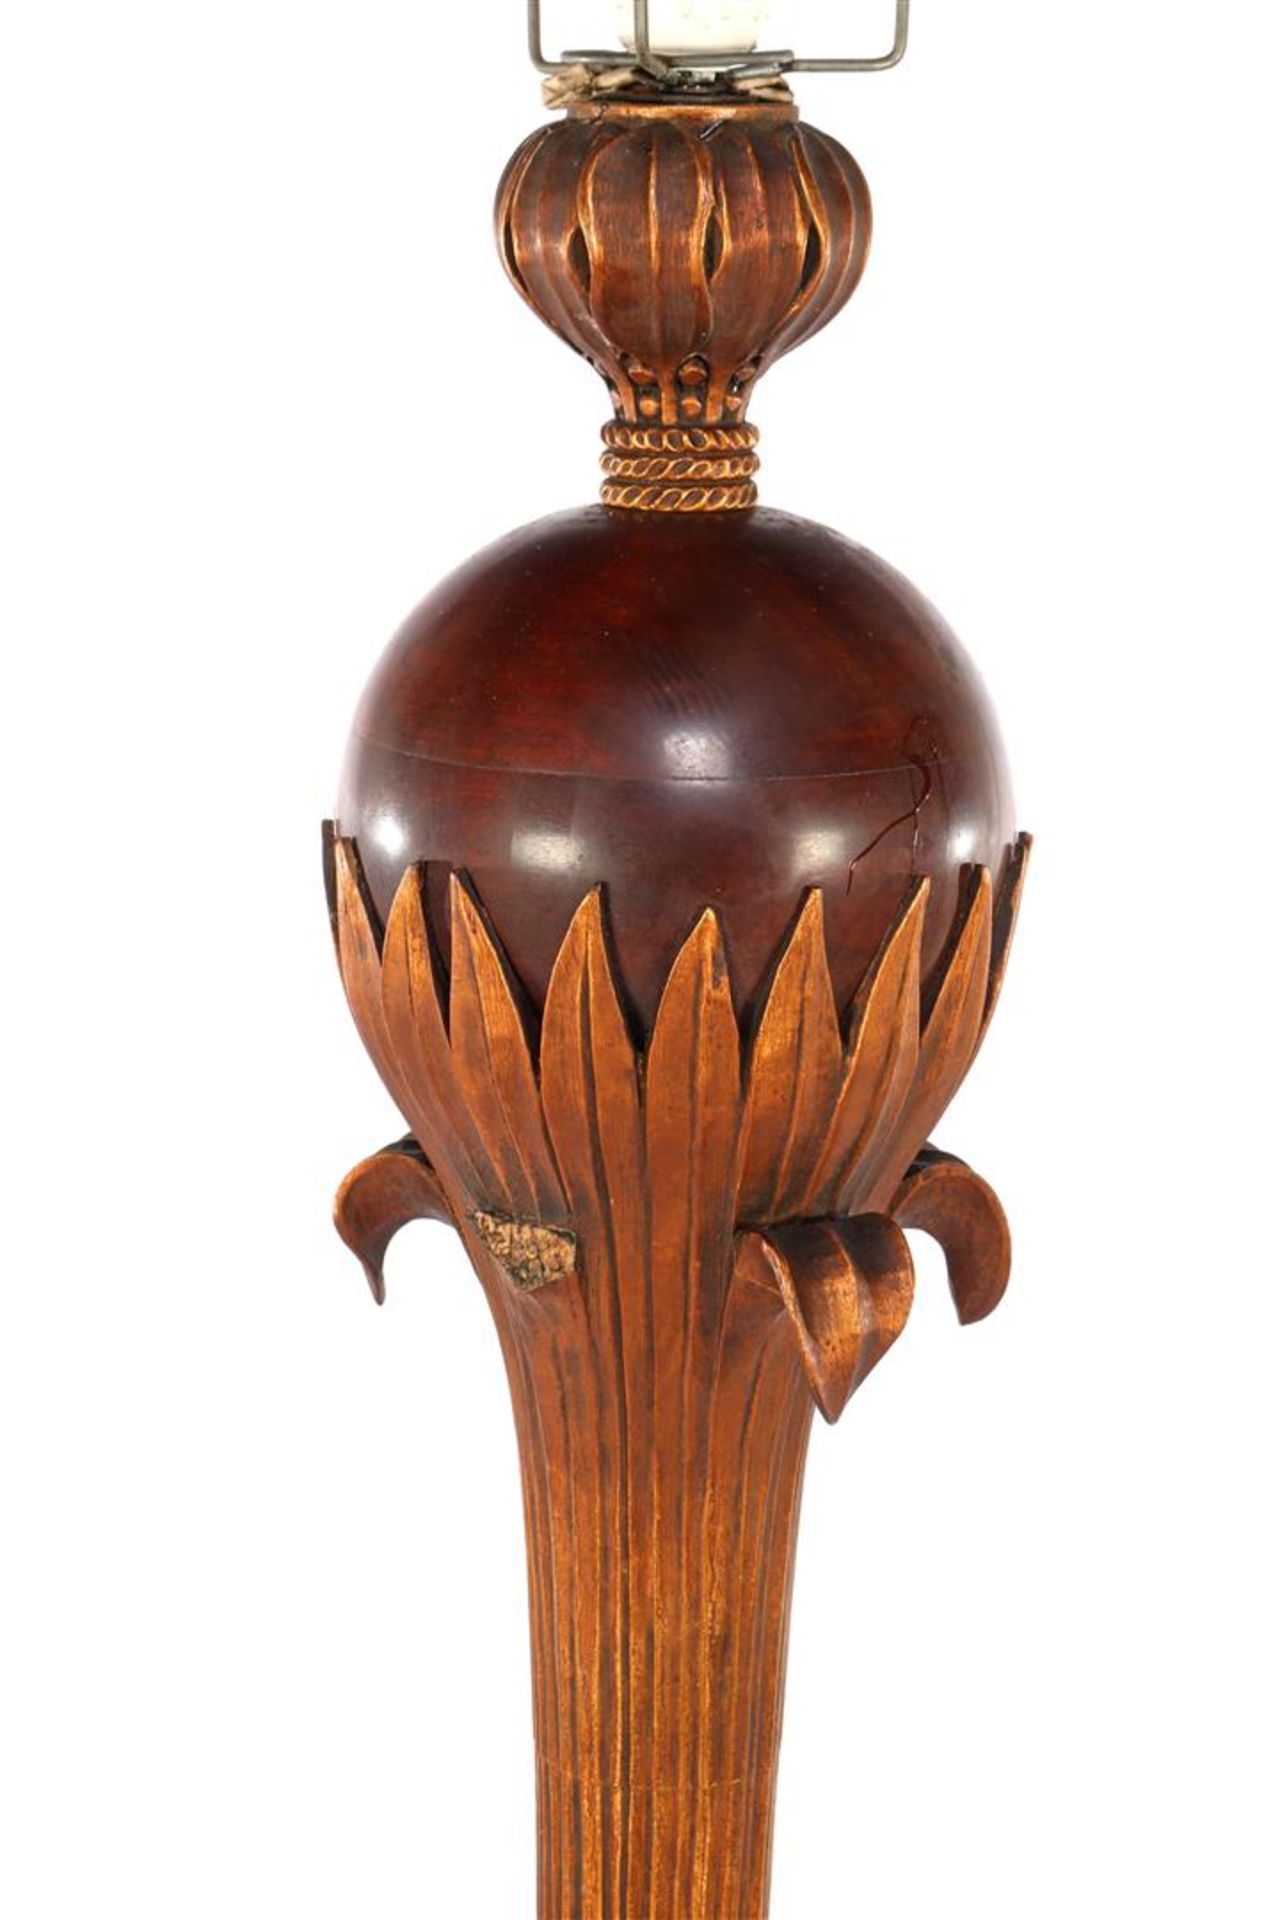 Wooden table lamp base in Art Deco style - Image 2 of 2